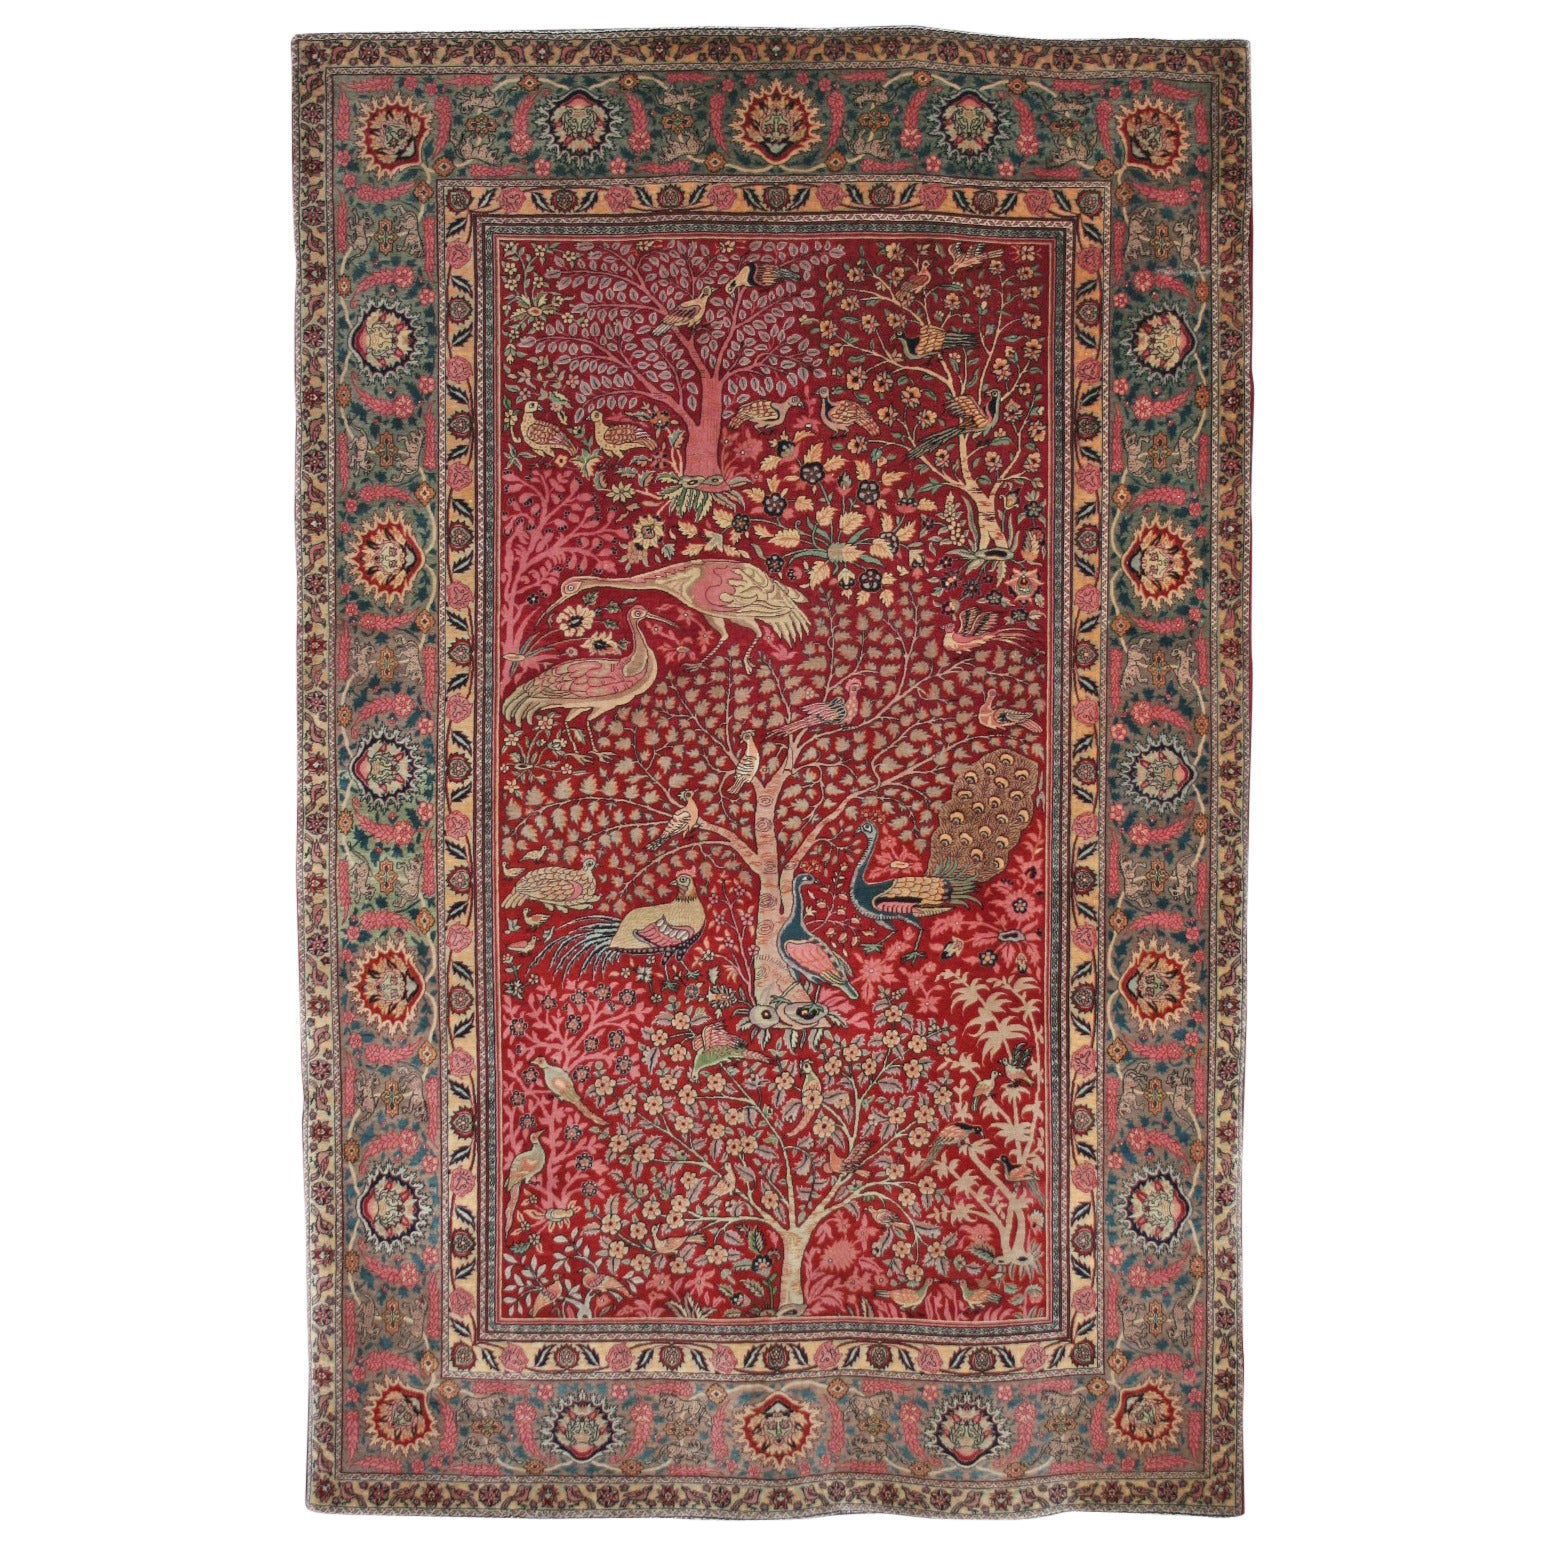 Very Rare Antique Pictorial Indian Mughal Carpet For Sale